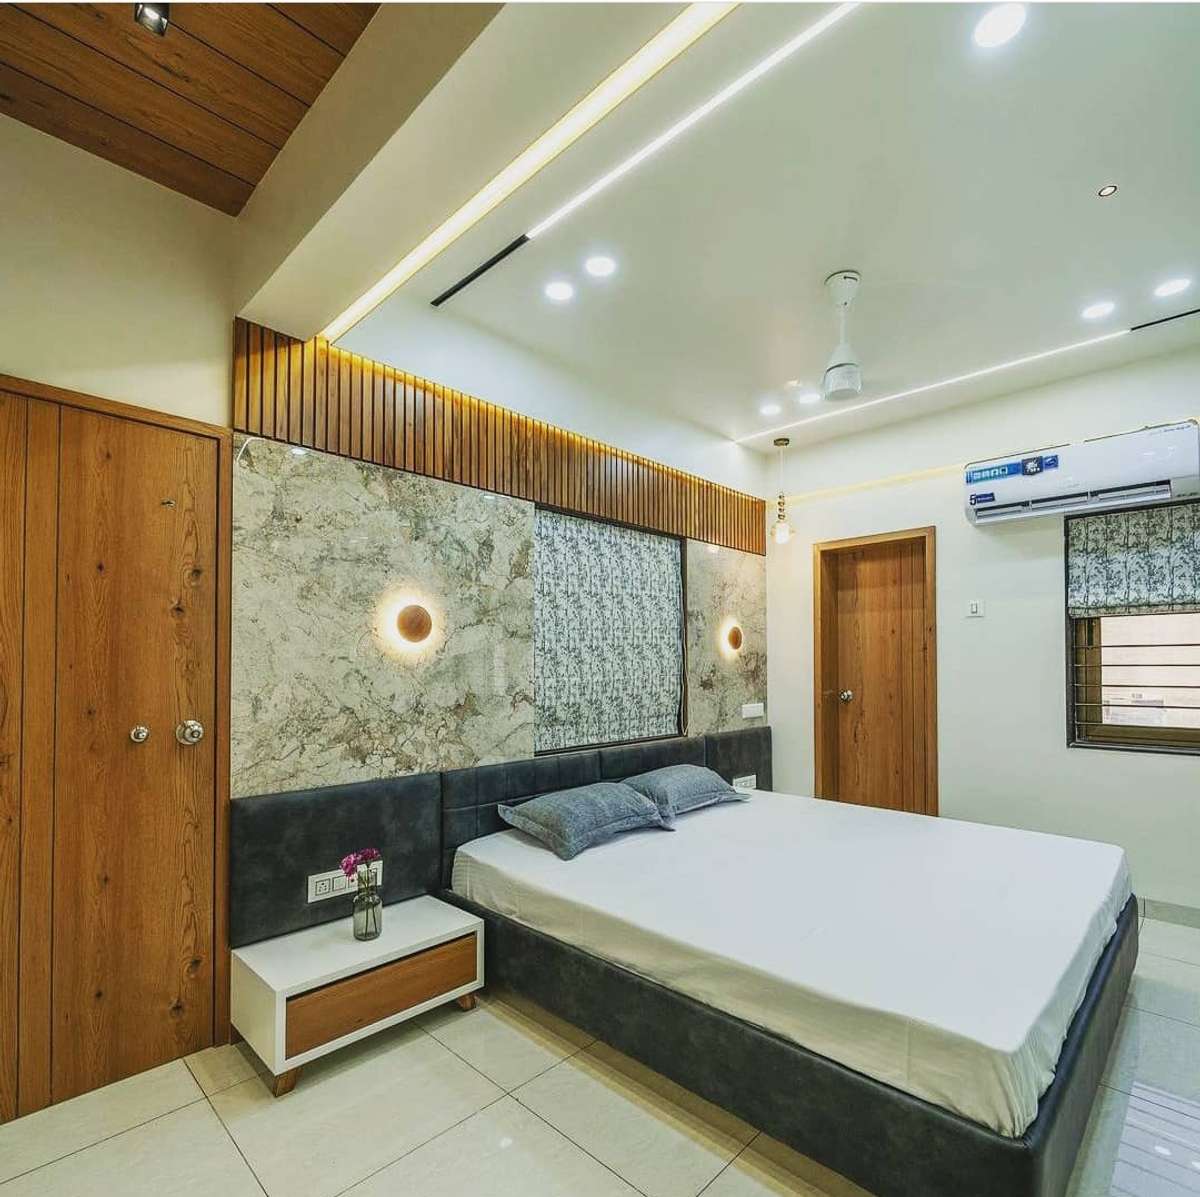 Ceiling, Furniture, Storage, Bedroom, Wall Designs by Interior Designer Dilshad Khan, Bhopal | Kolo